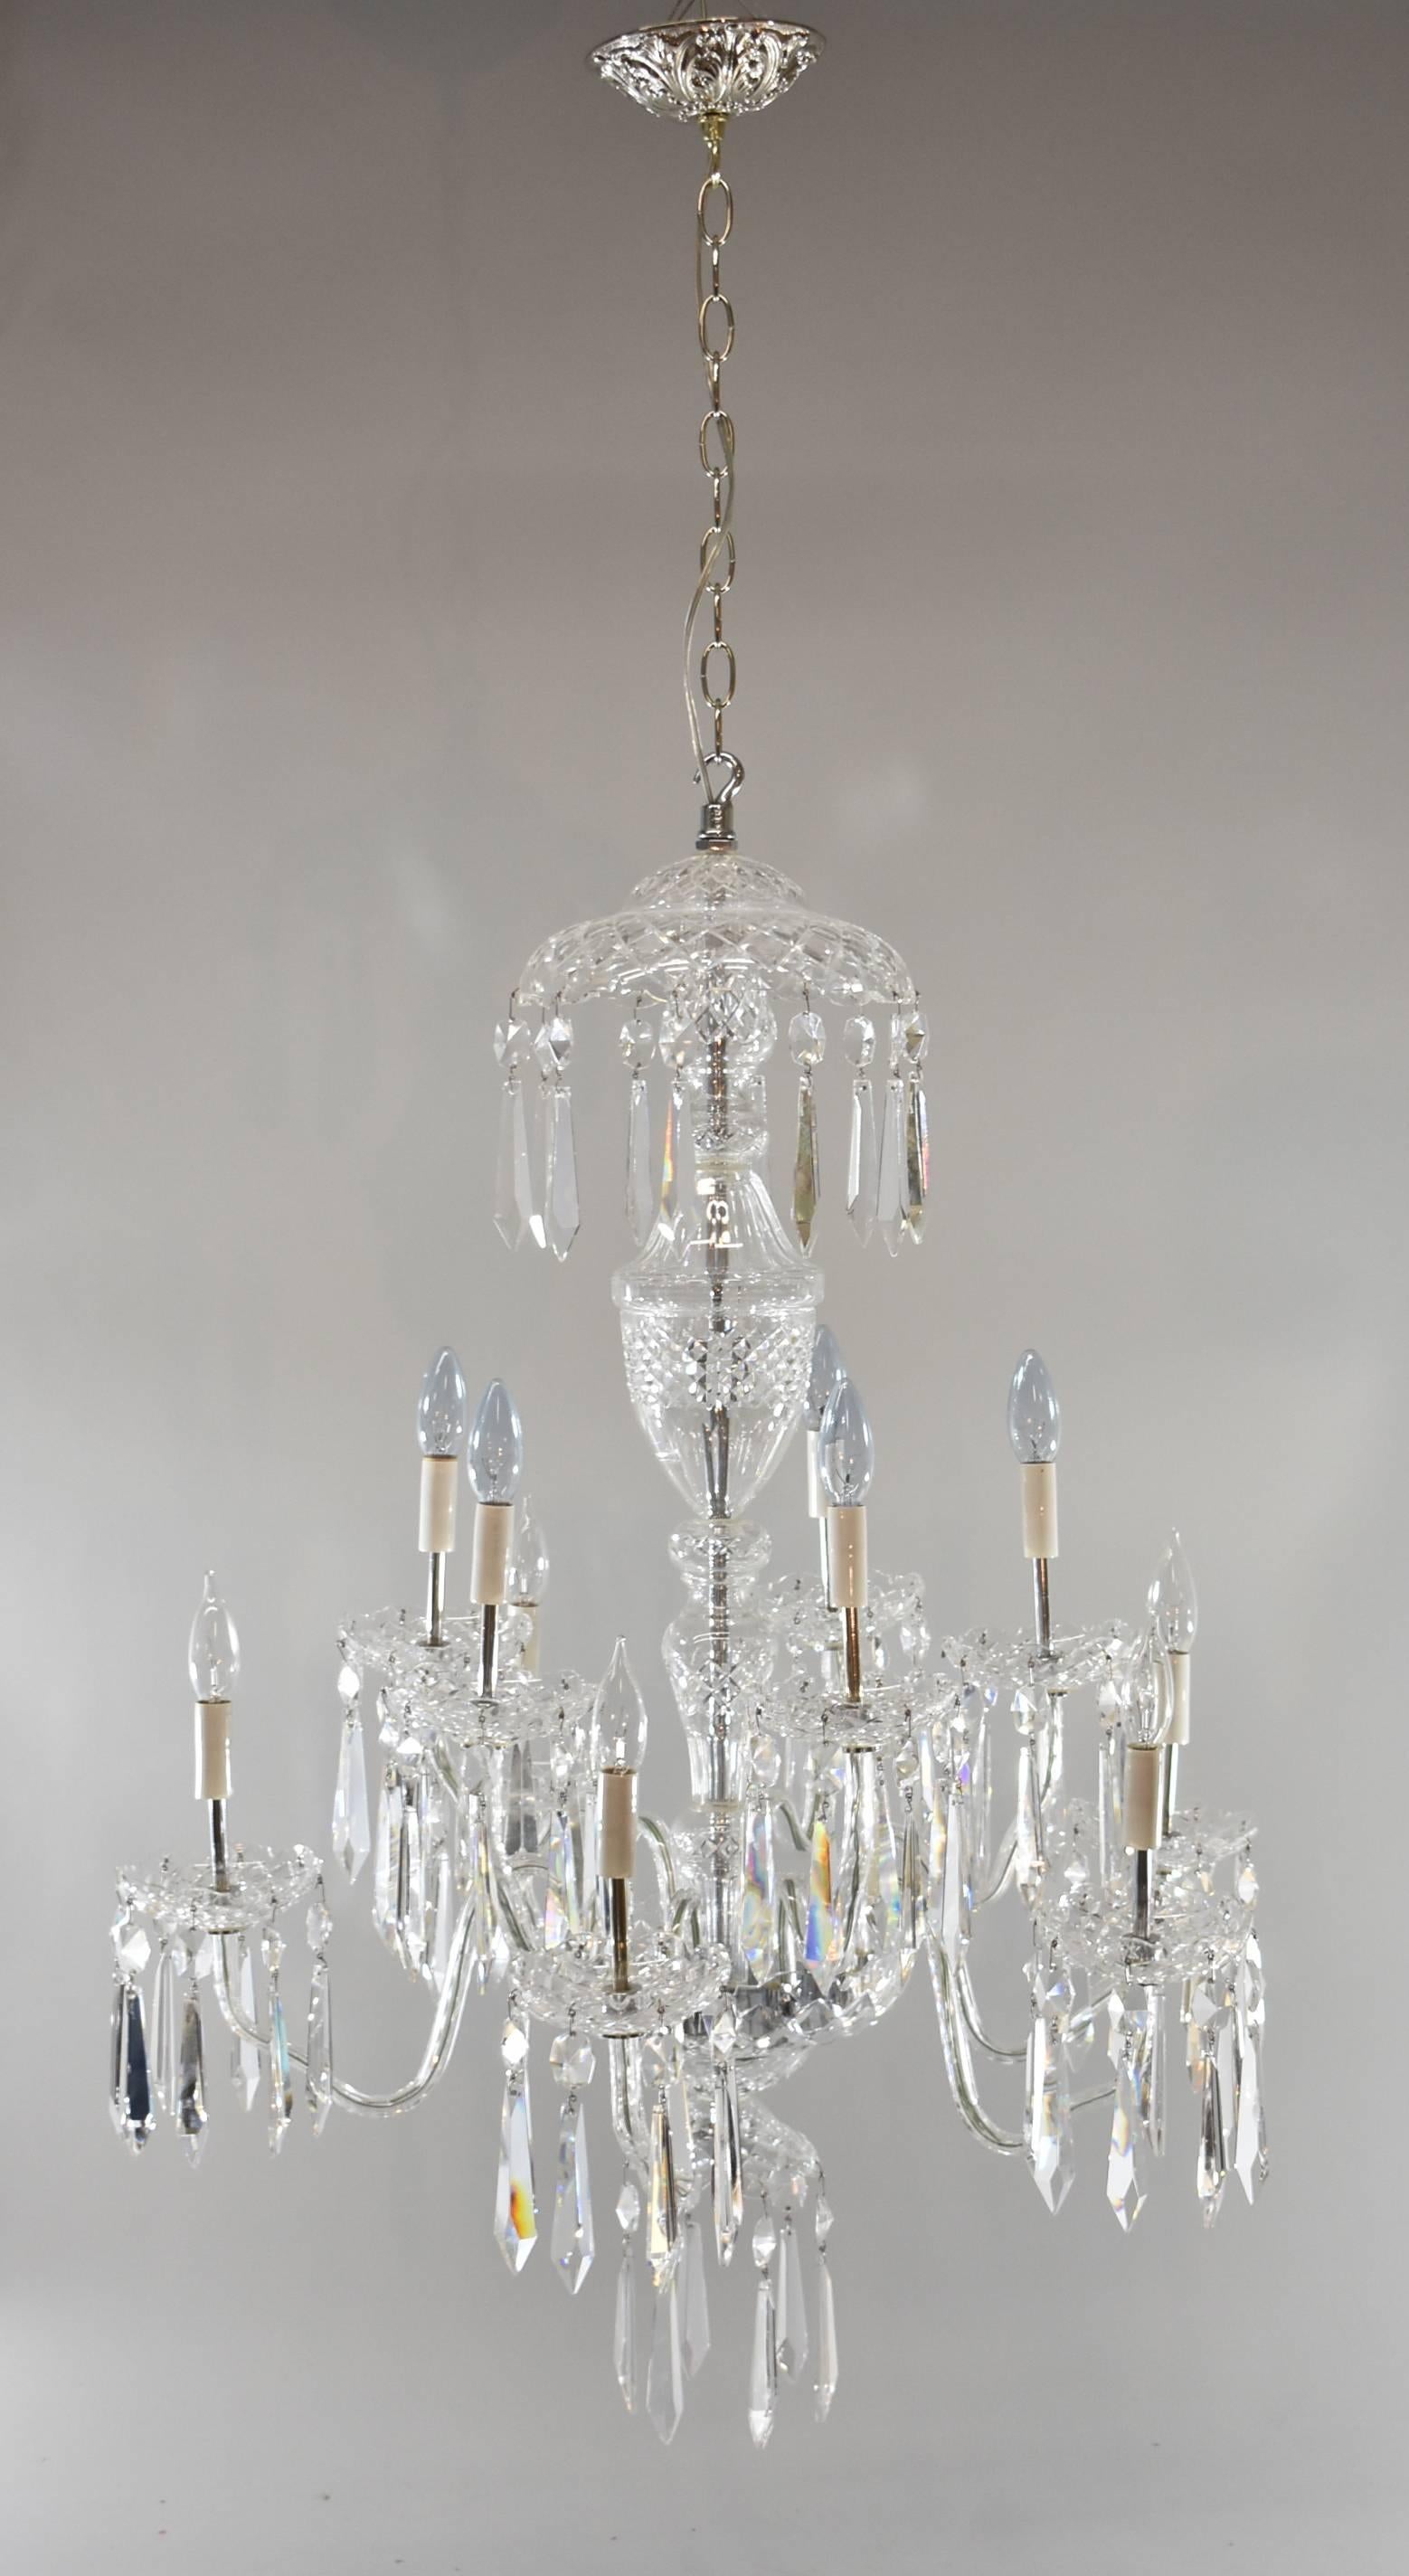 An impressive ten-arm crystal chandelier by Waterford. The Waterford Avoca ten-arm chandelier is double-tiered and features Waterford's Avoca crystal pattern. The beautiful A10 Waterford Crystal chandelier has a crystal center column and is